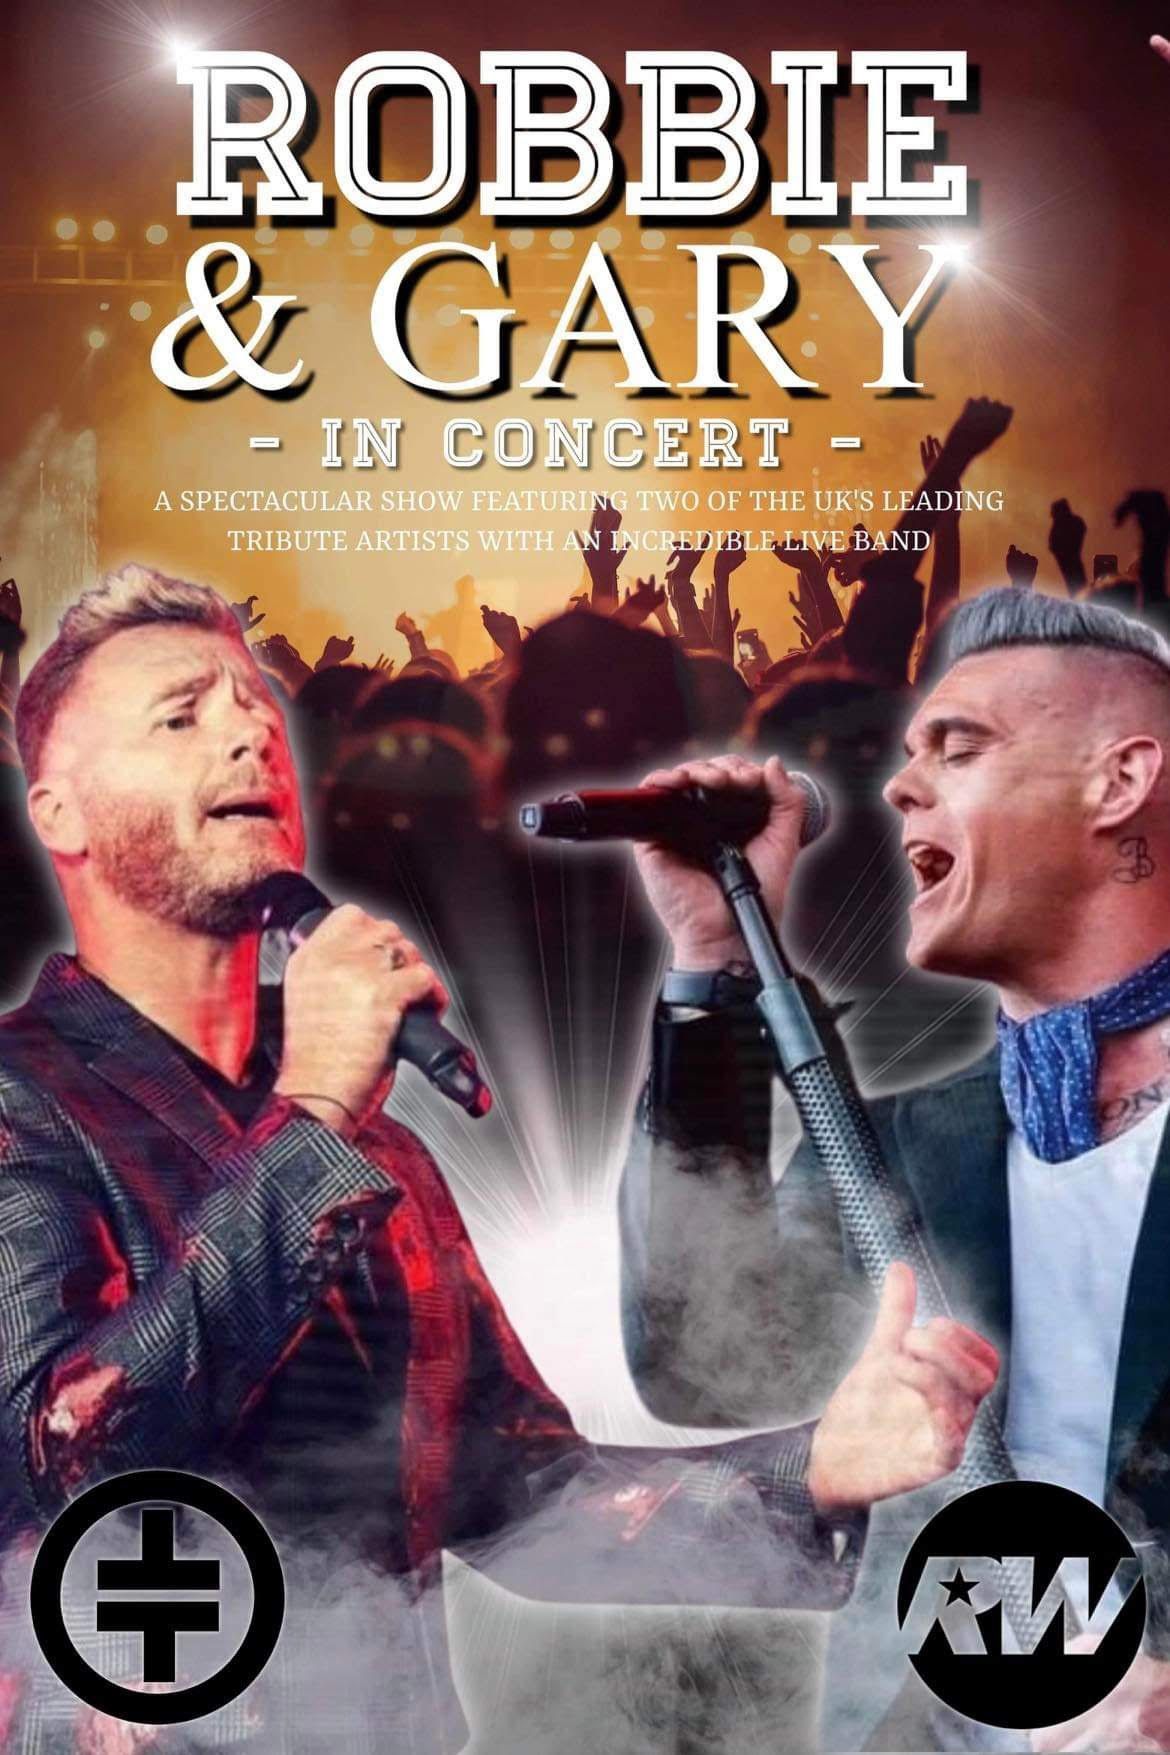 Robbie Williams & Gary Barlow in Concert Tickets Only